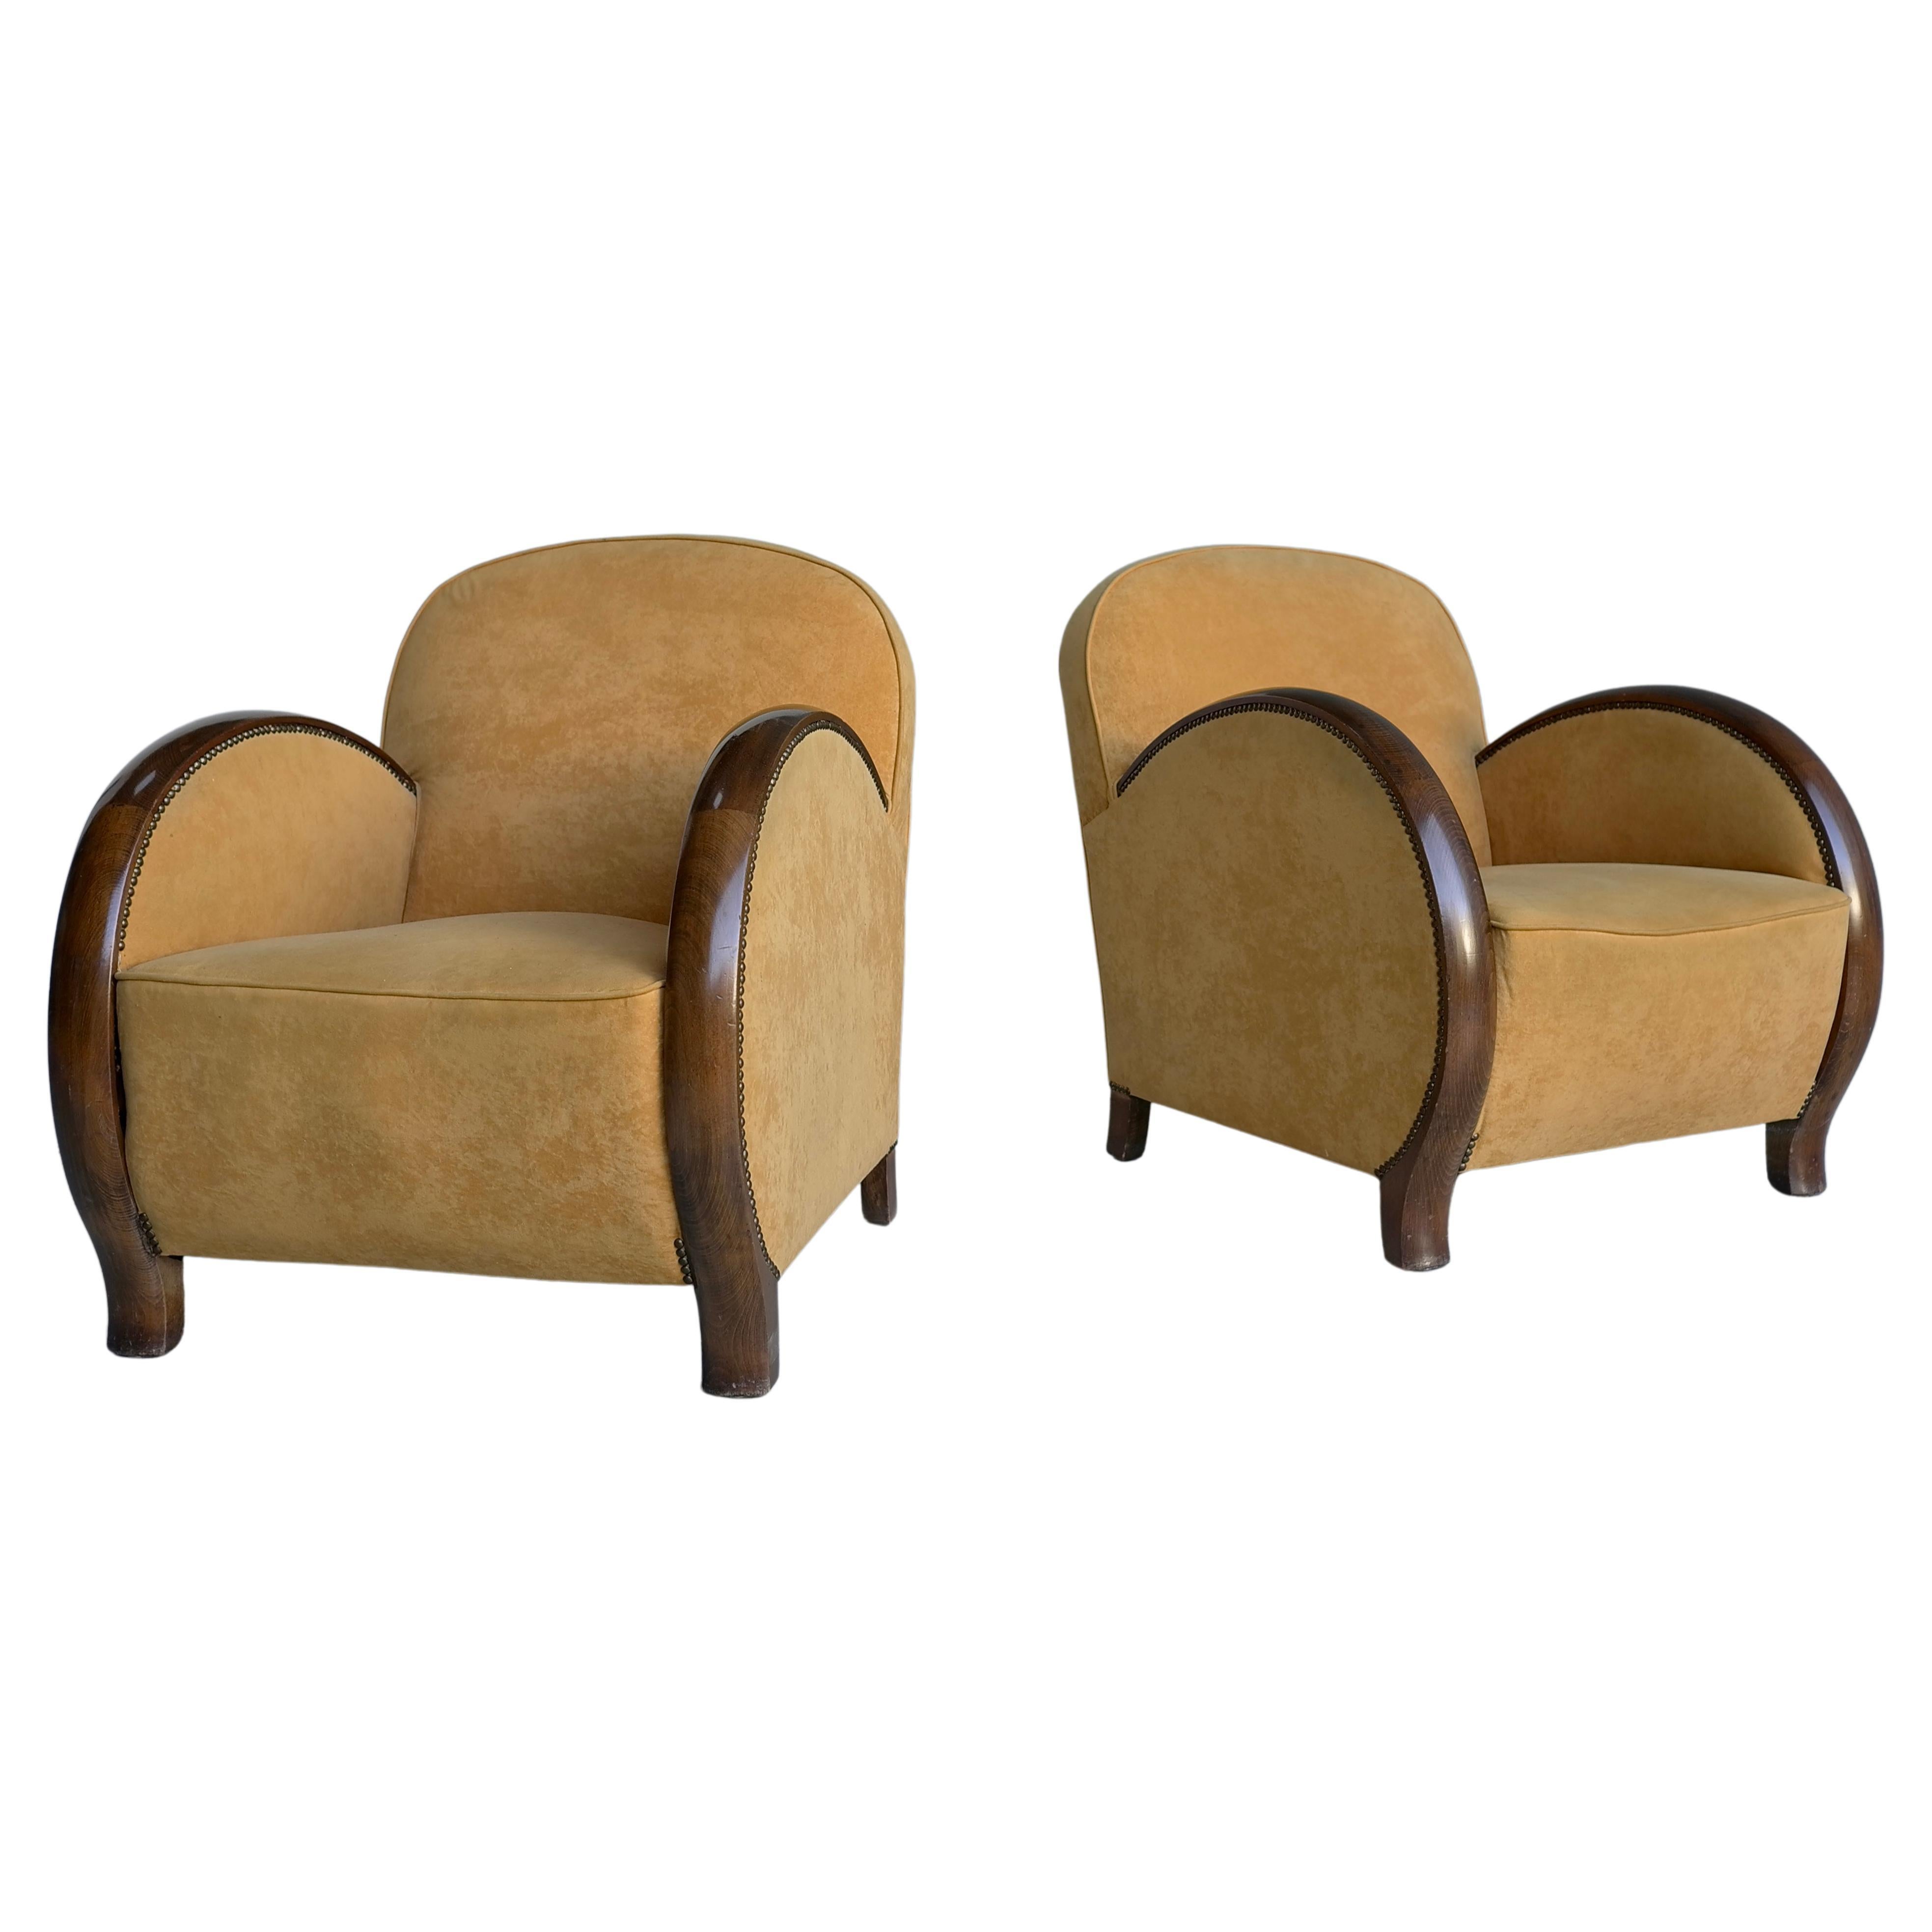 Pair of Art Deco Streamlined Armchairs in yellow Velvet with Wooden arms 1930's For Sale 8